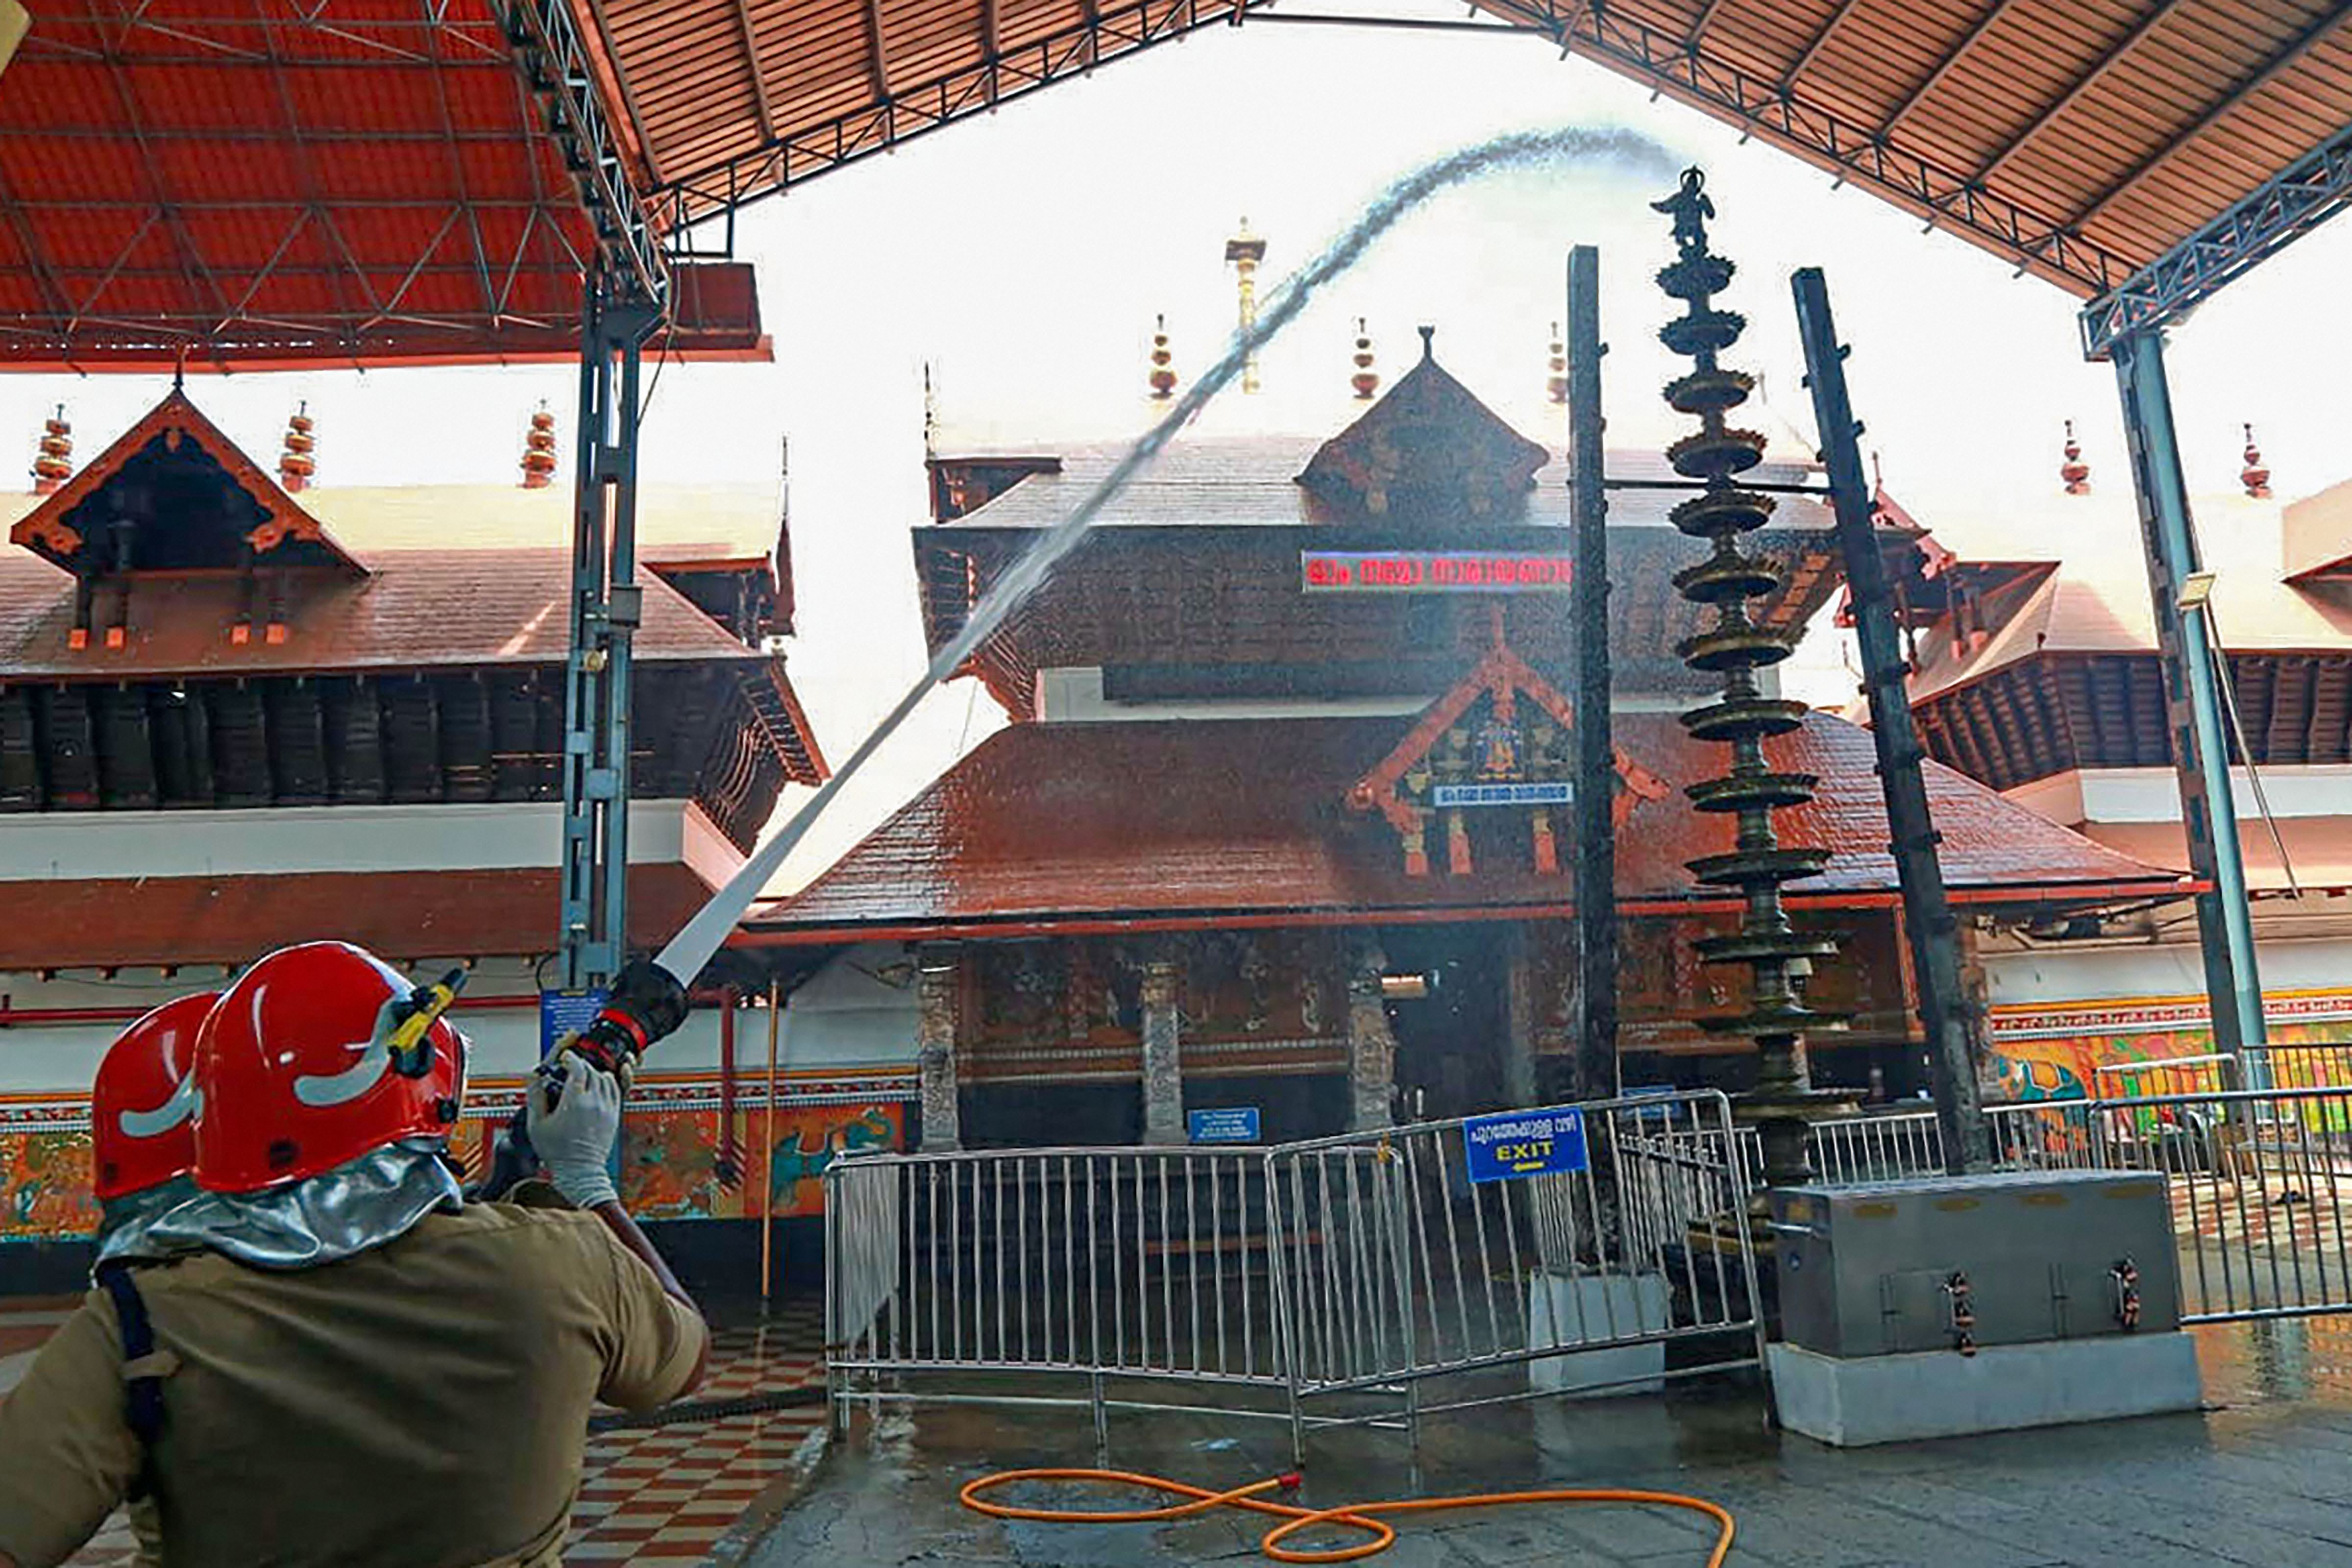 Guruvayur Sri Krishna temple being cleaned ahead of its reopening tomororow, during the ongoing Covid-19 lockdown, in Kochi, Monday, June 8, 2020